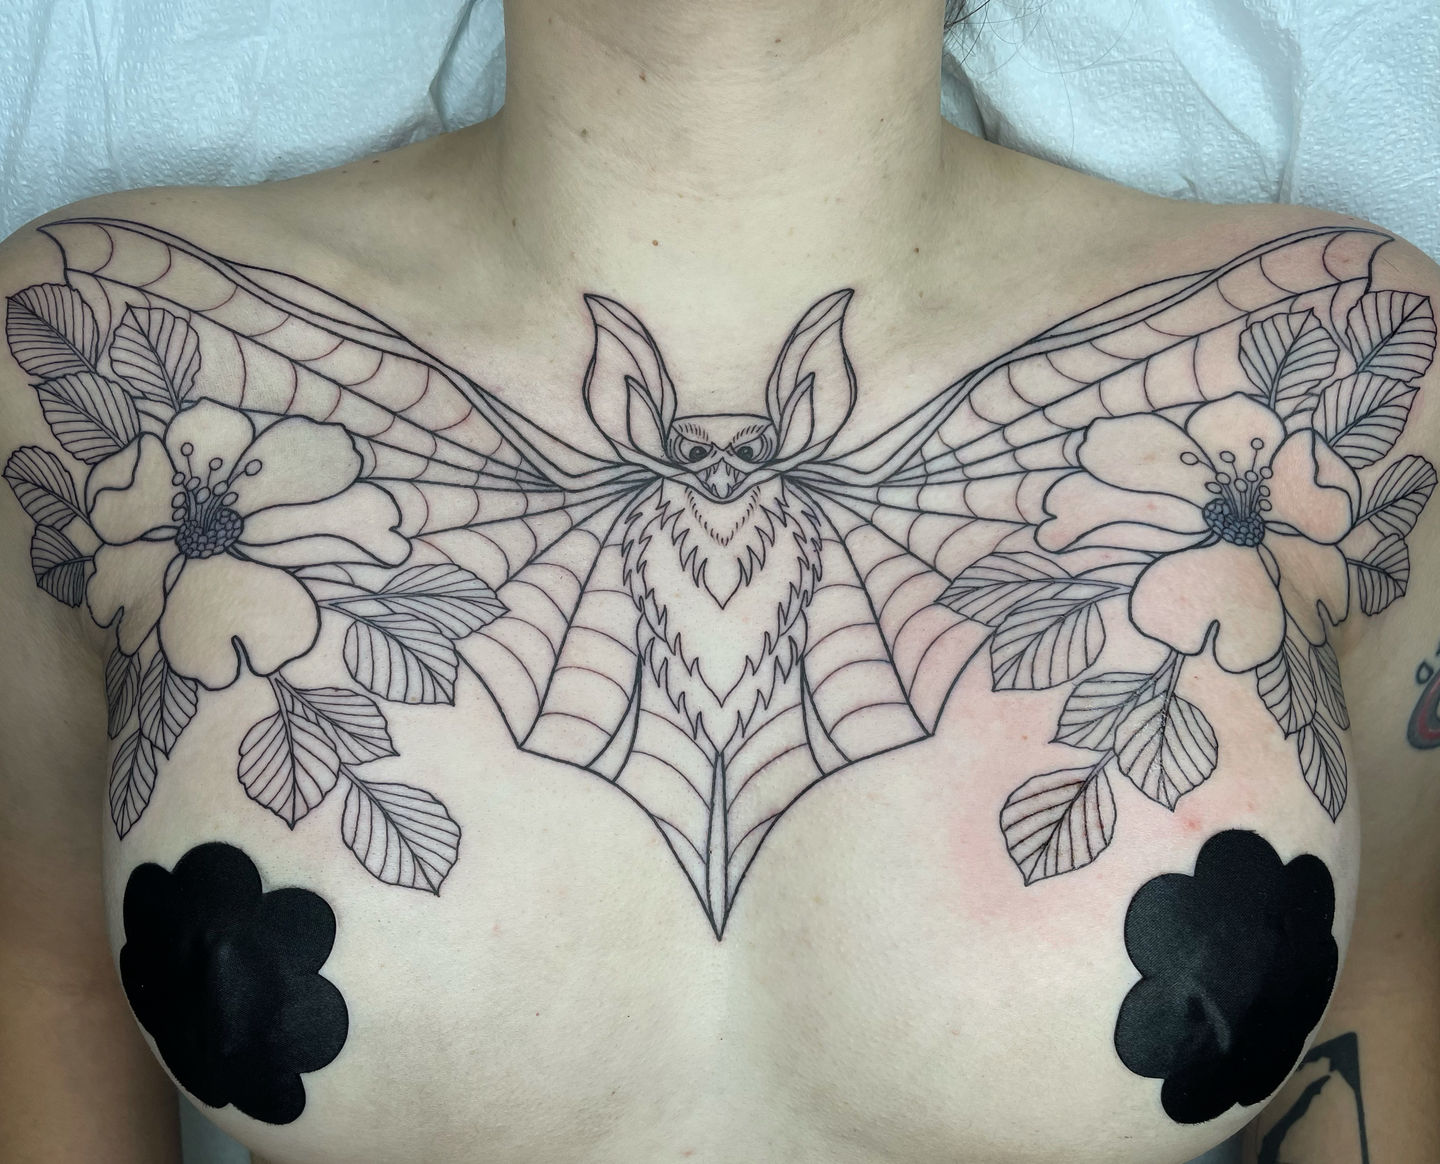 Covered this up for a fellow female tattoo artist Done by me in Vermont   rtattoo